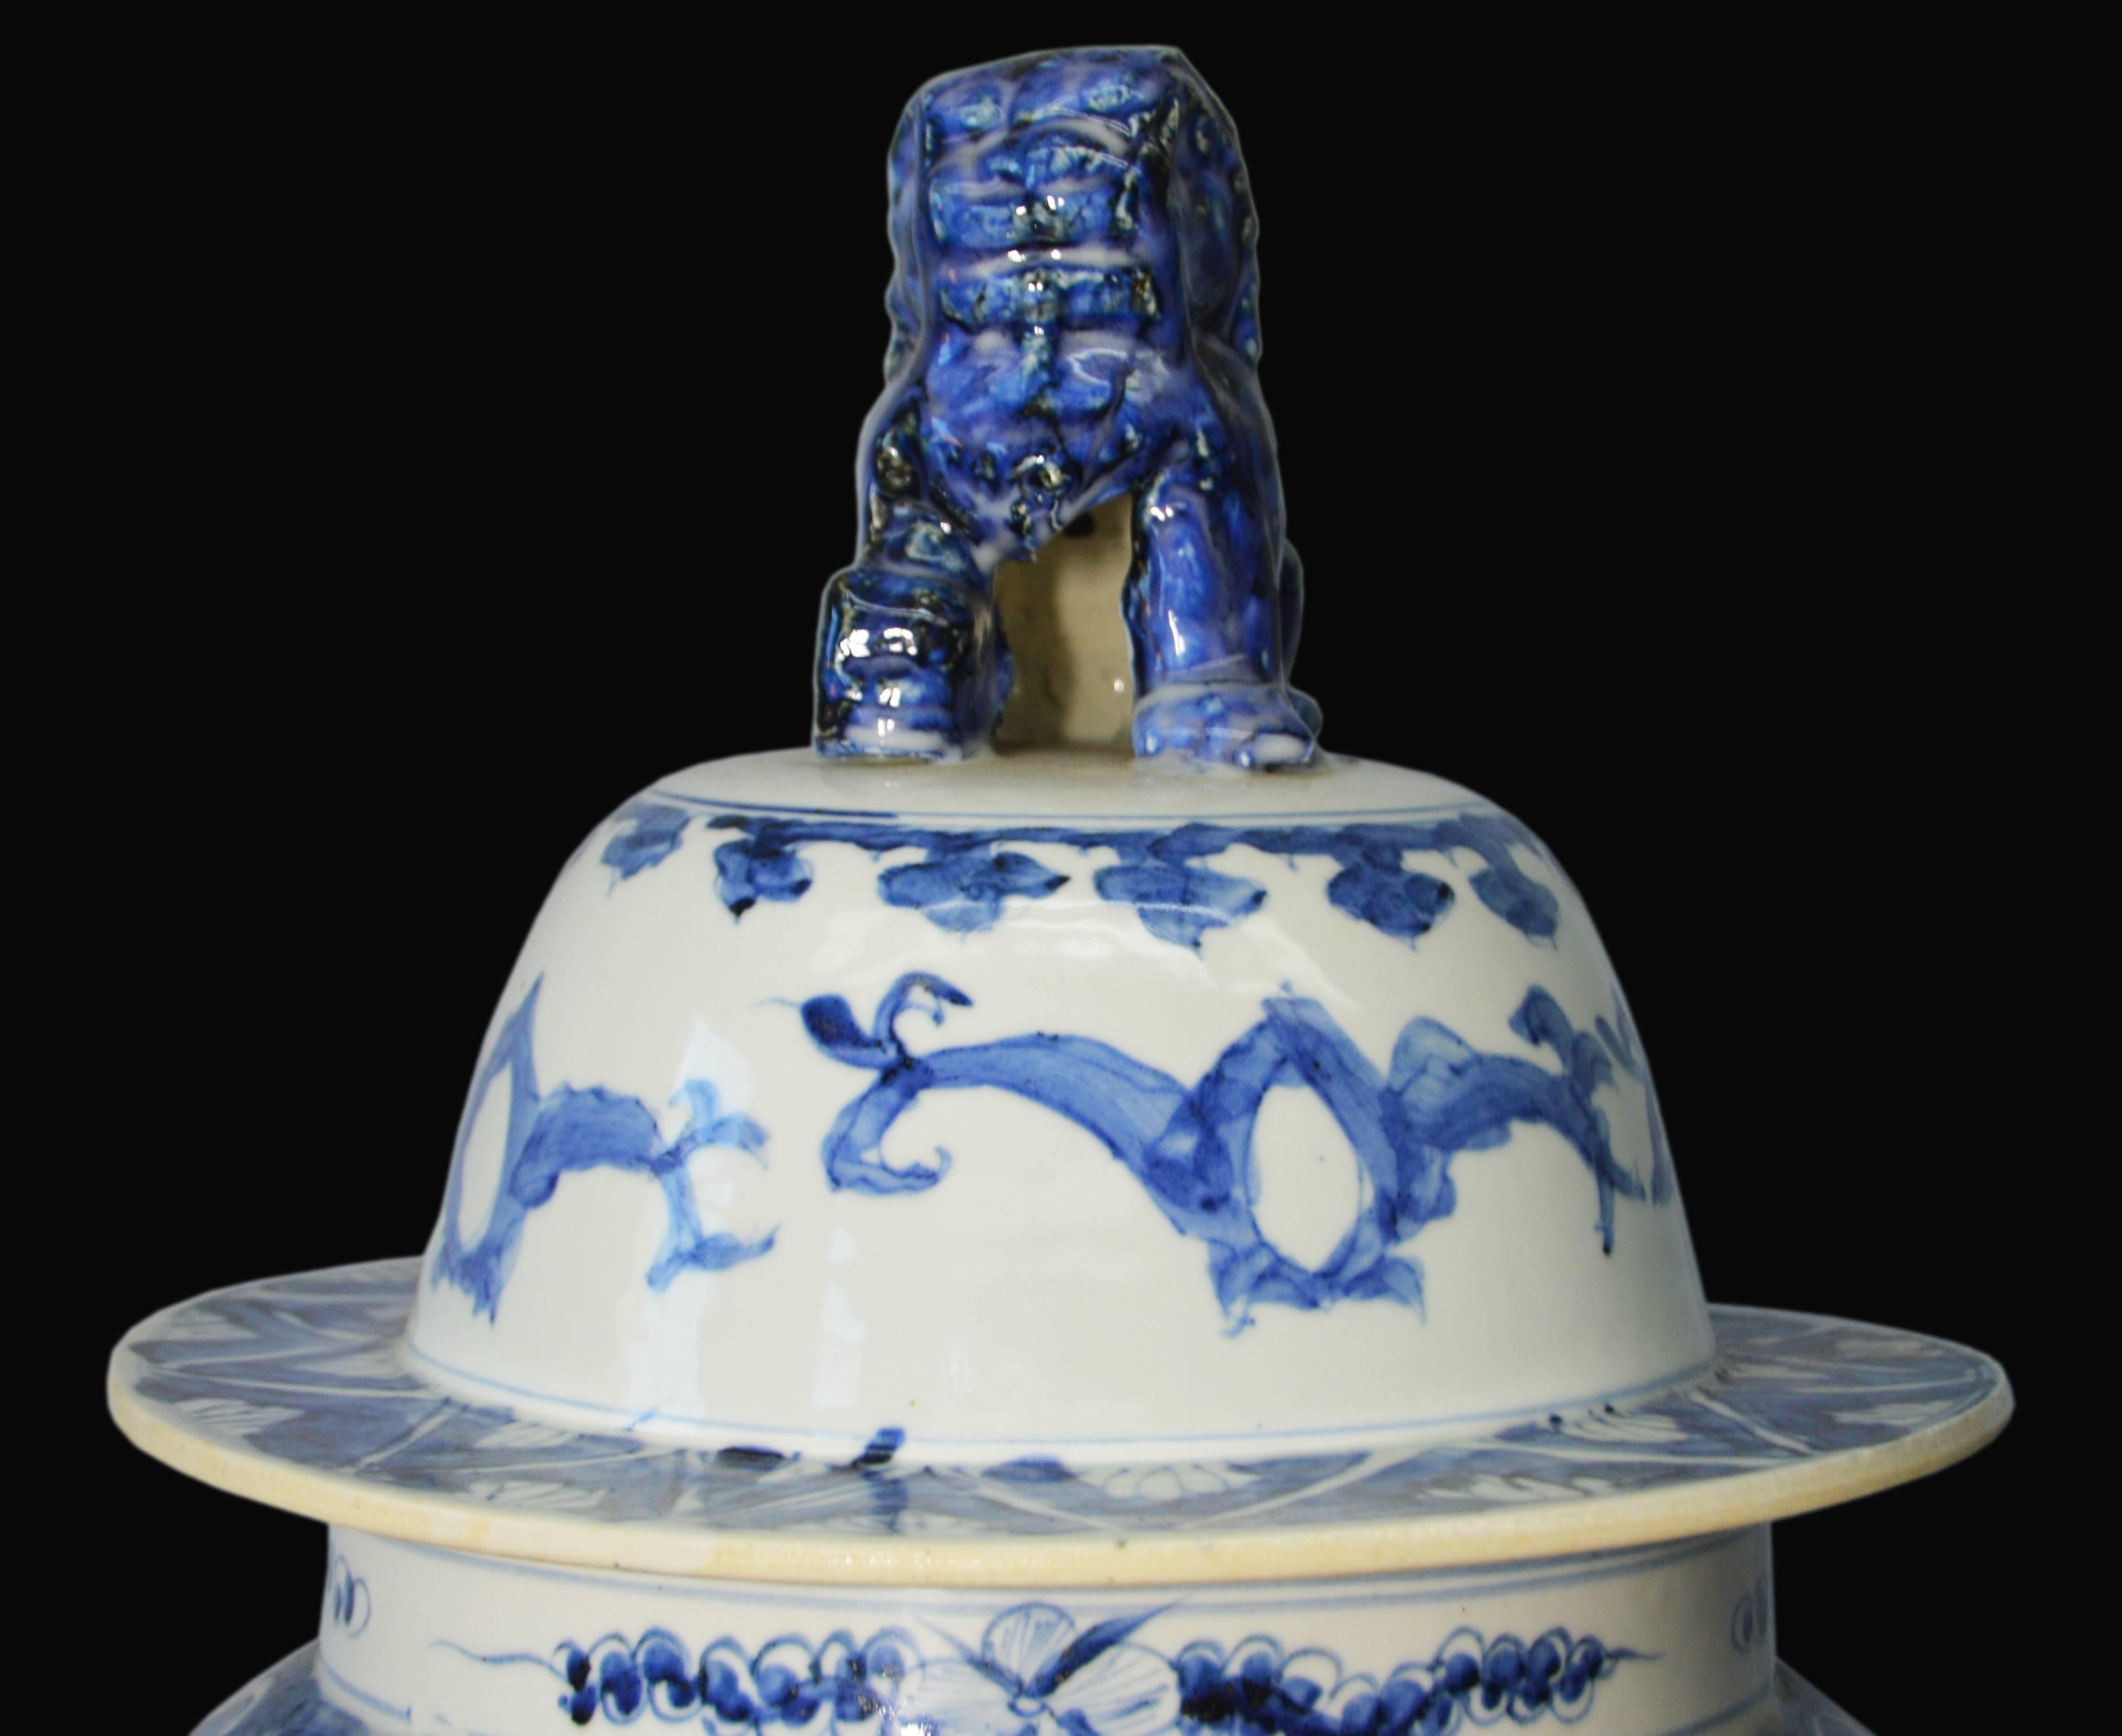 A Chinese vintage hand painted blue and white porcelain vase with dragon motifs and foo-dog lidded top. Born in mid-20th century this Chinese porcelain lidded baluster-form vase features an exquisite blue decor, hand painted on a white ground,